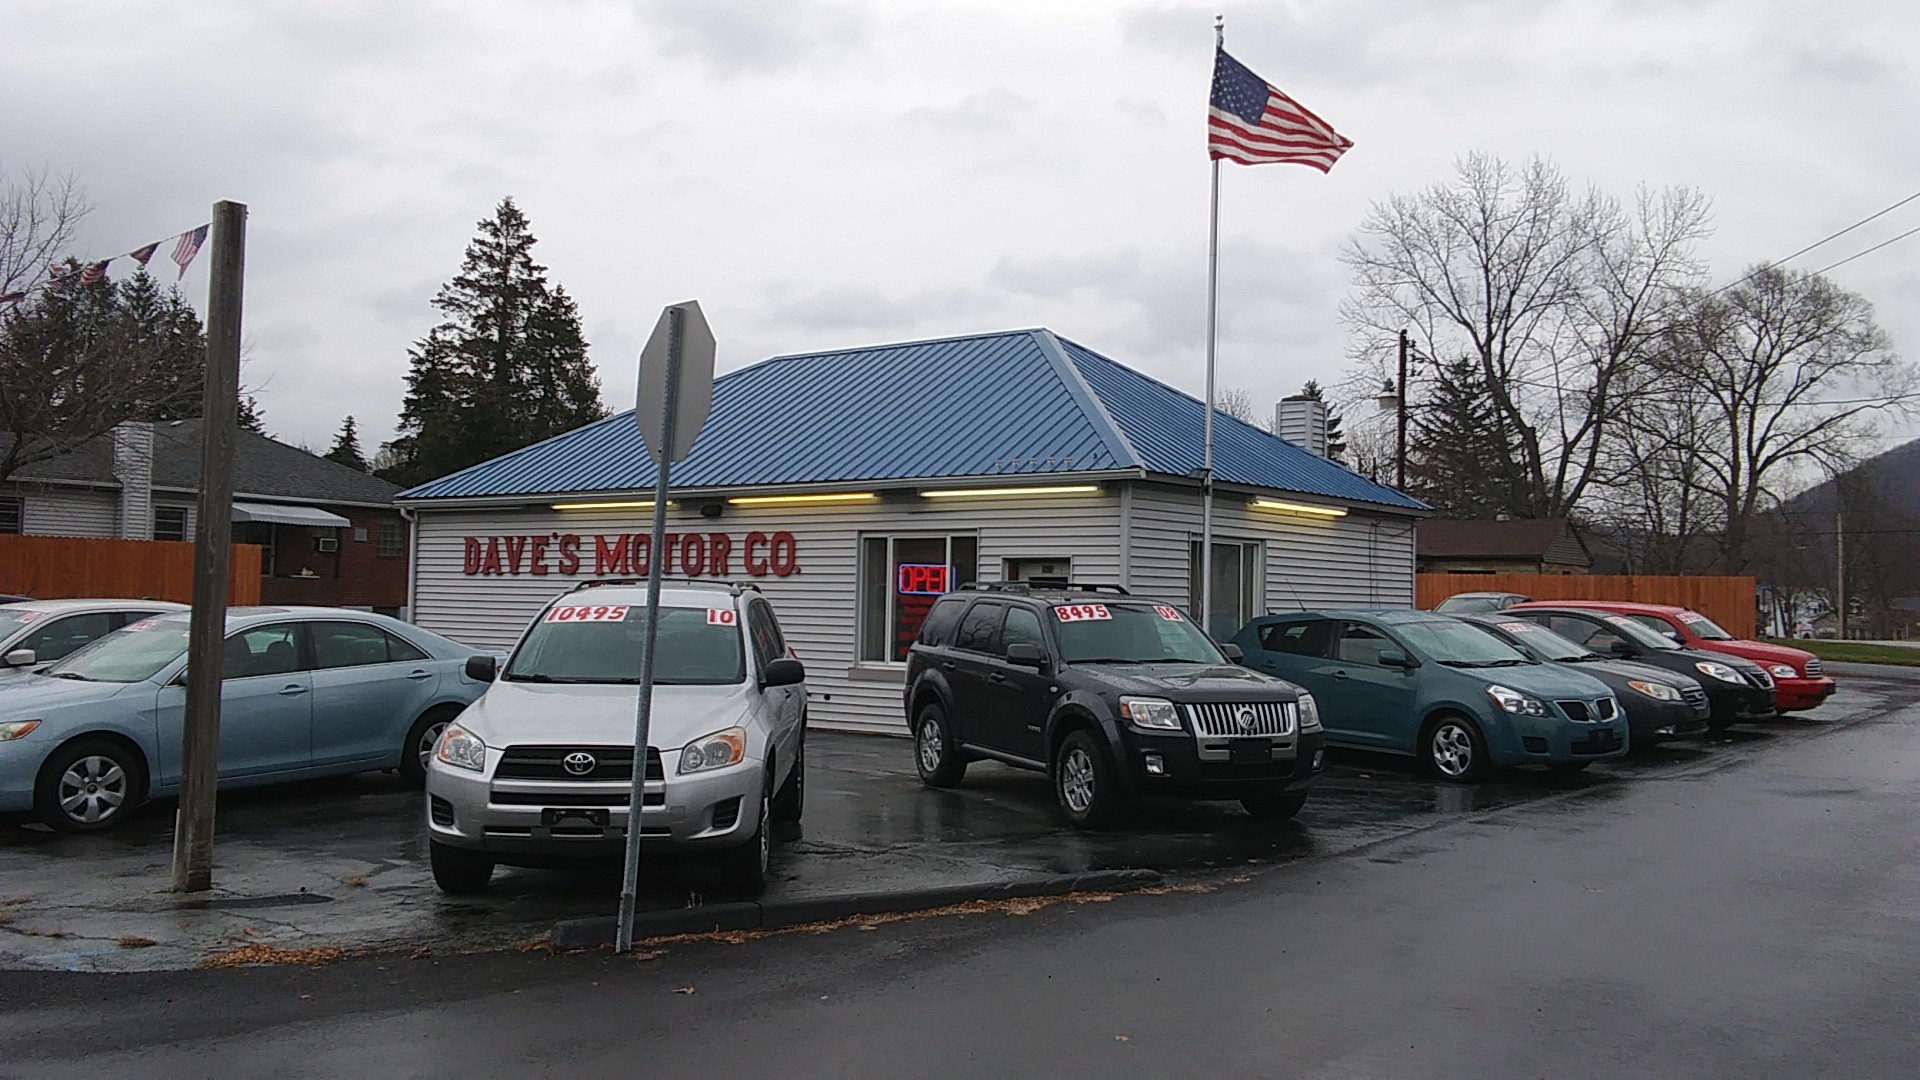 Dave's Motor Co